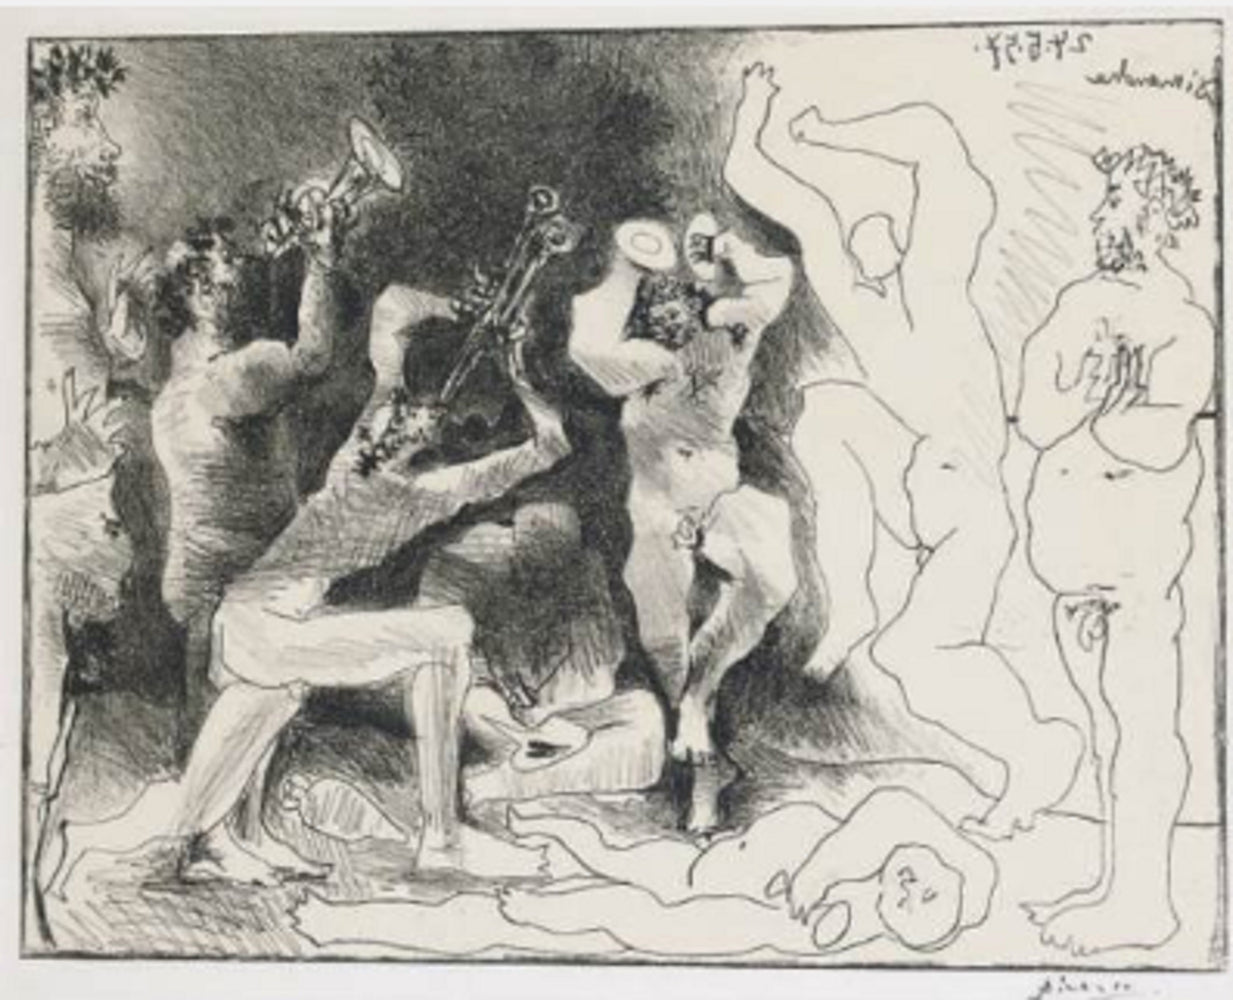 The Faun's Dance (Bloch 830; Mourlot 291) Lithograph, edition of 1000 by Pablo Picasso